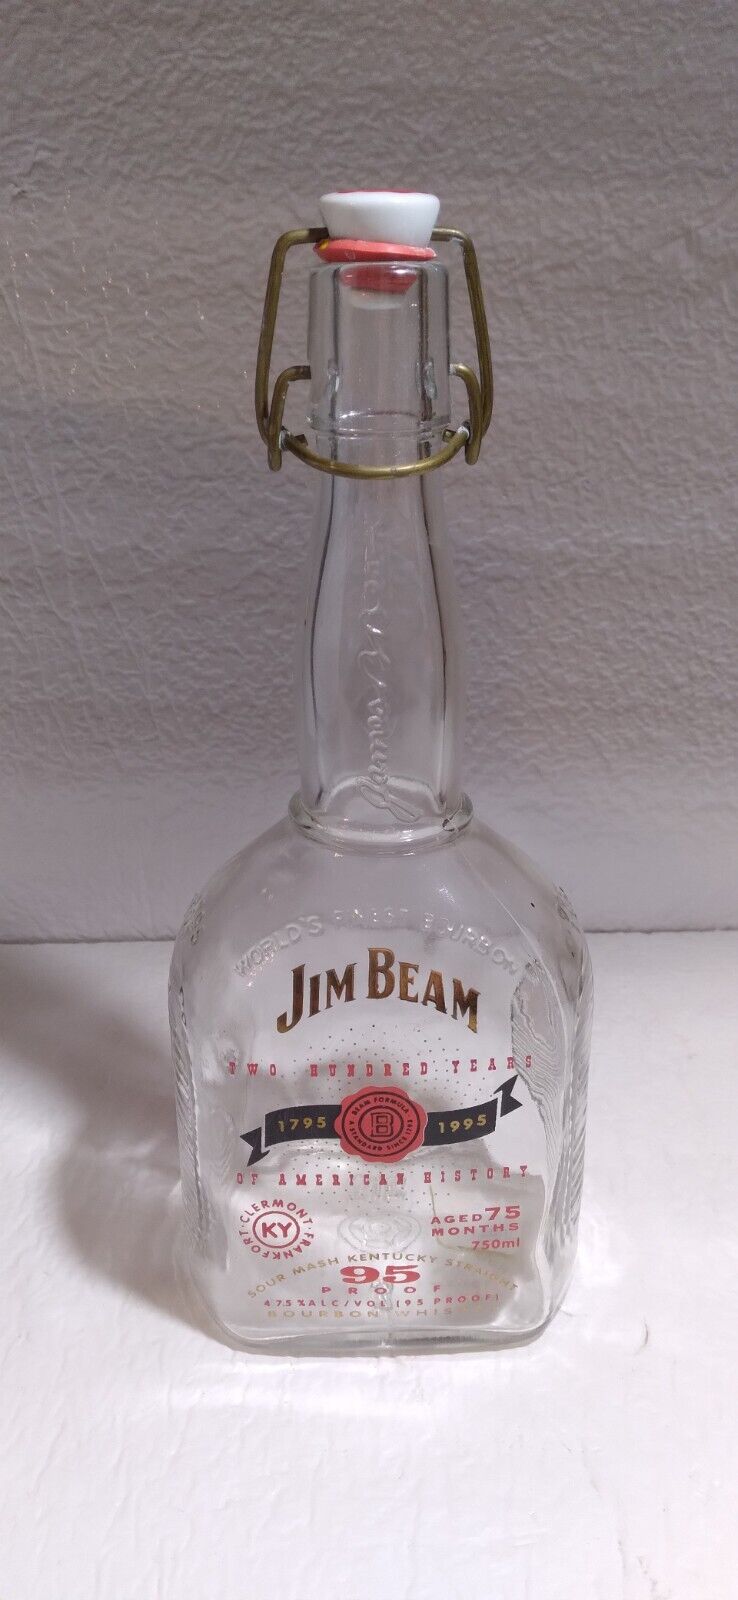 1995 Jim Beam 200th Year Anniversary Limited Edition Decanter Bottle